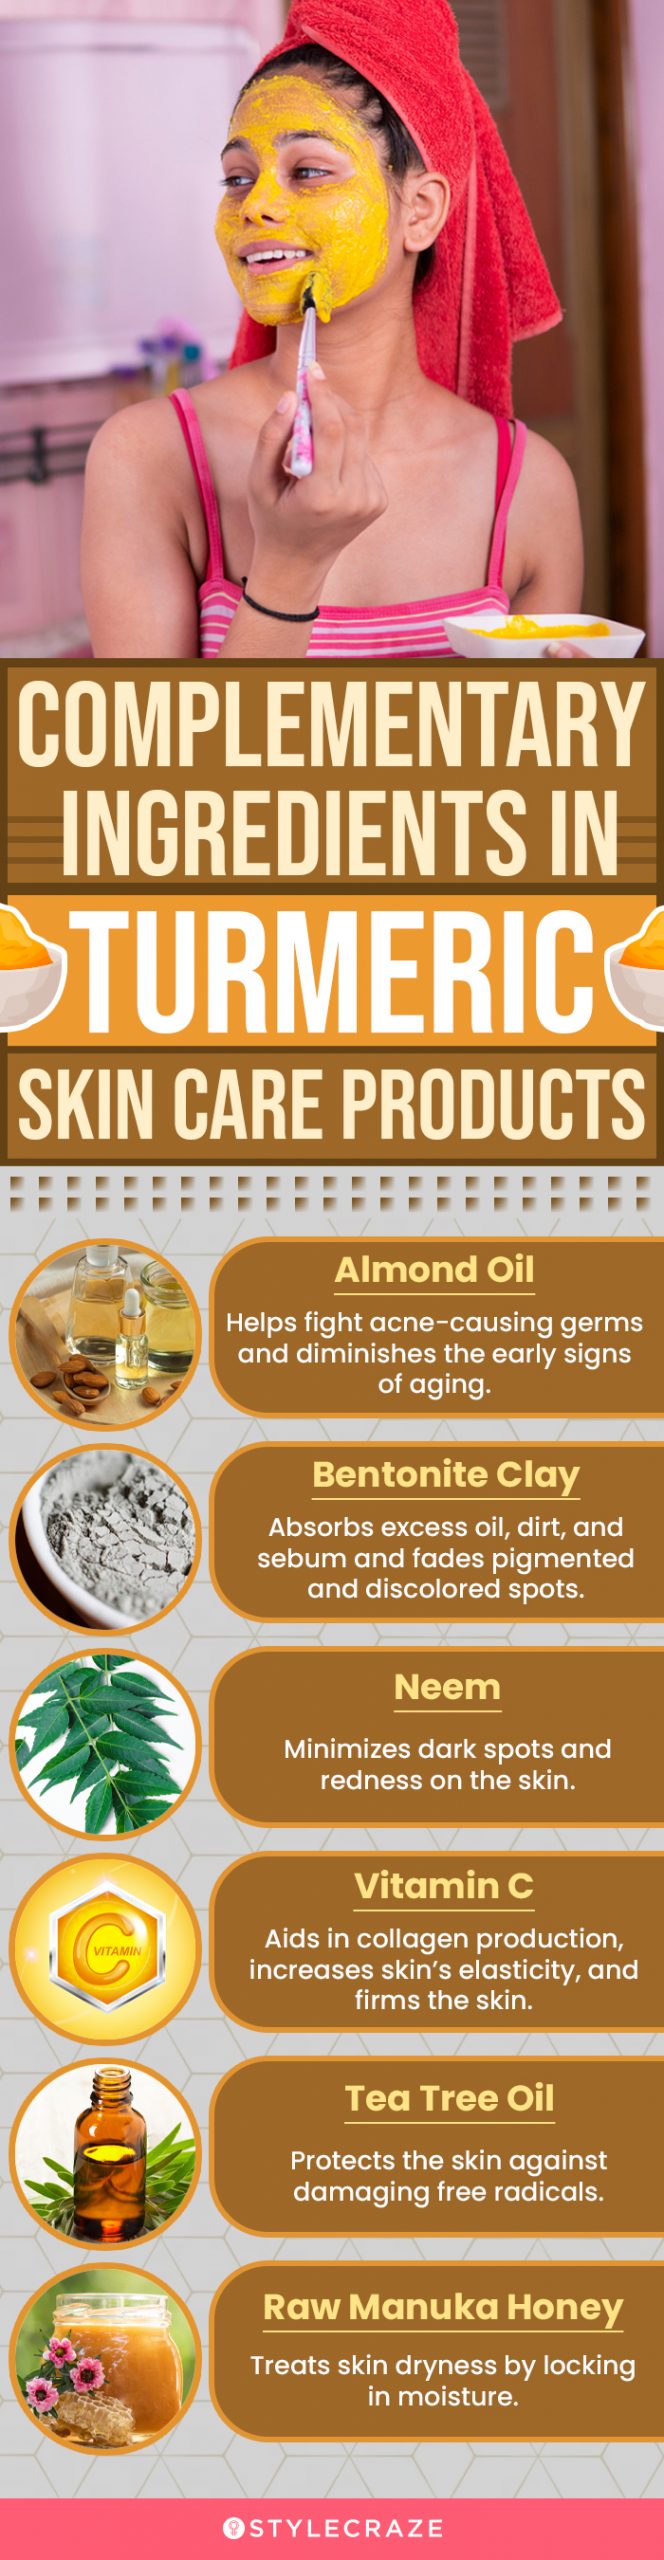 Complementary Ingredients In Turmeric Skin Care Products (infographic)